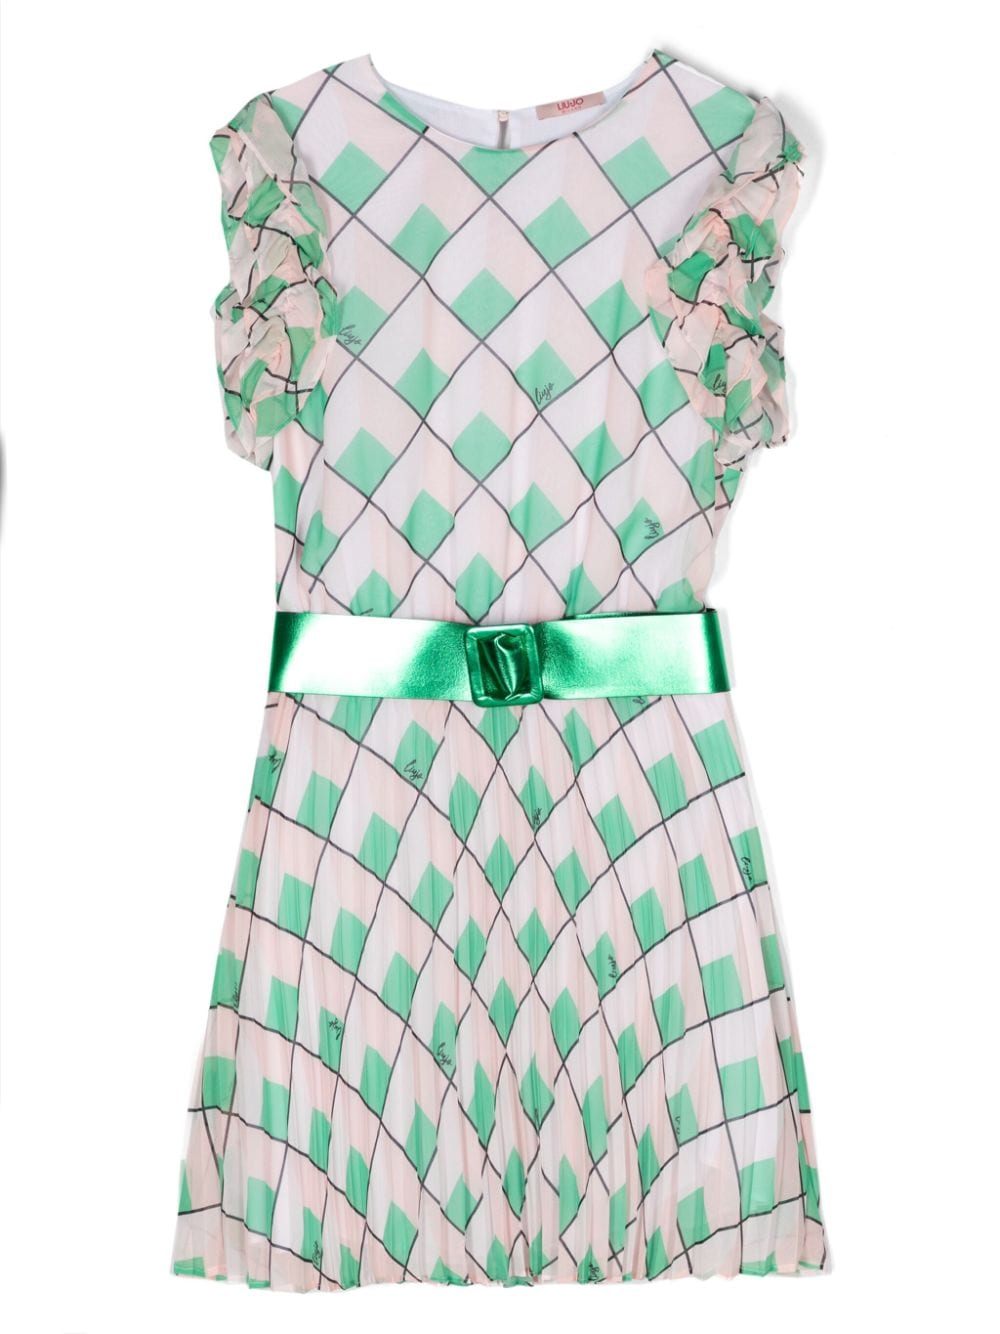 Green and pink dress for girls